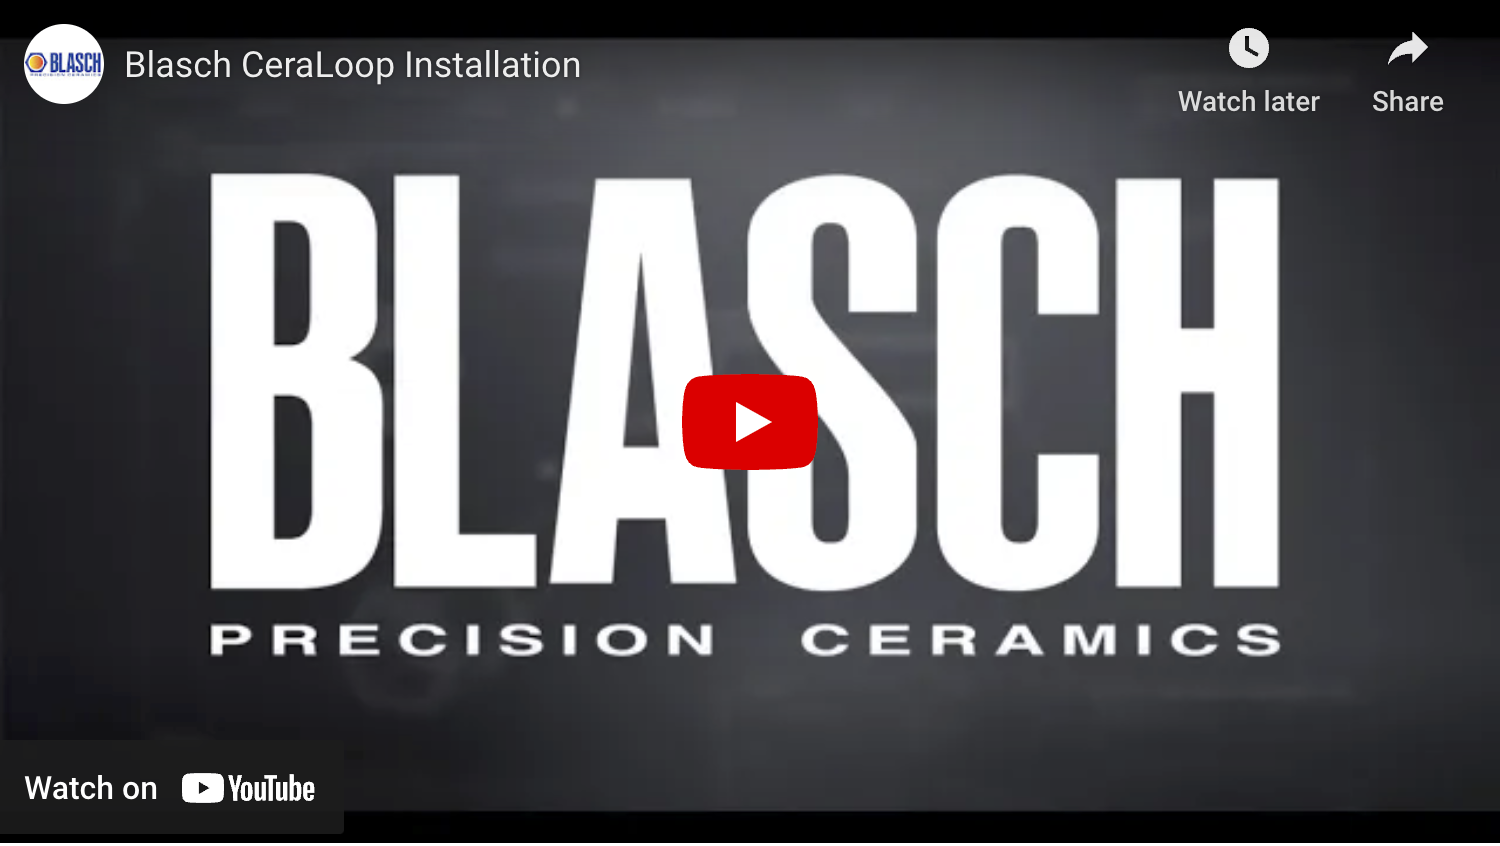 Thumbnail for the Blasch CeraLoop Installation Animation video